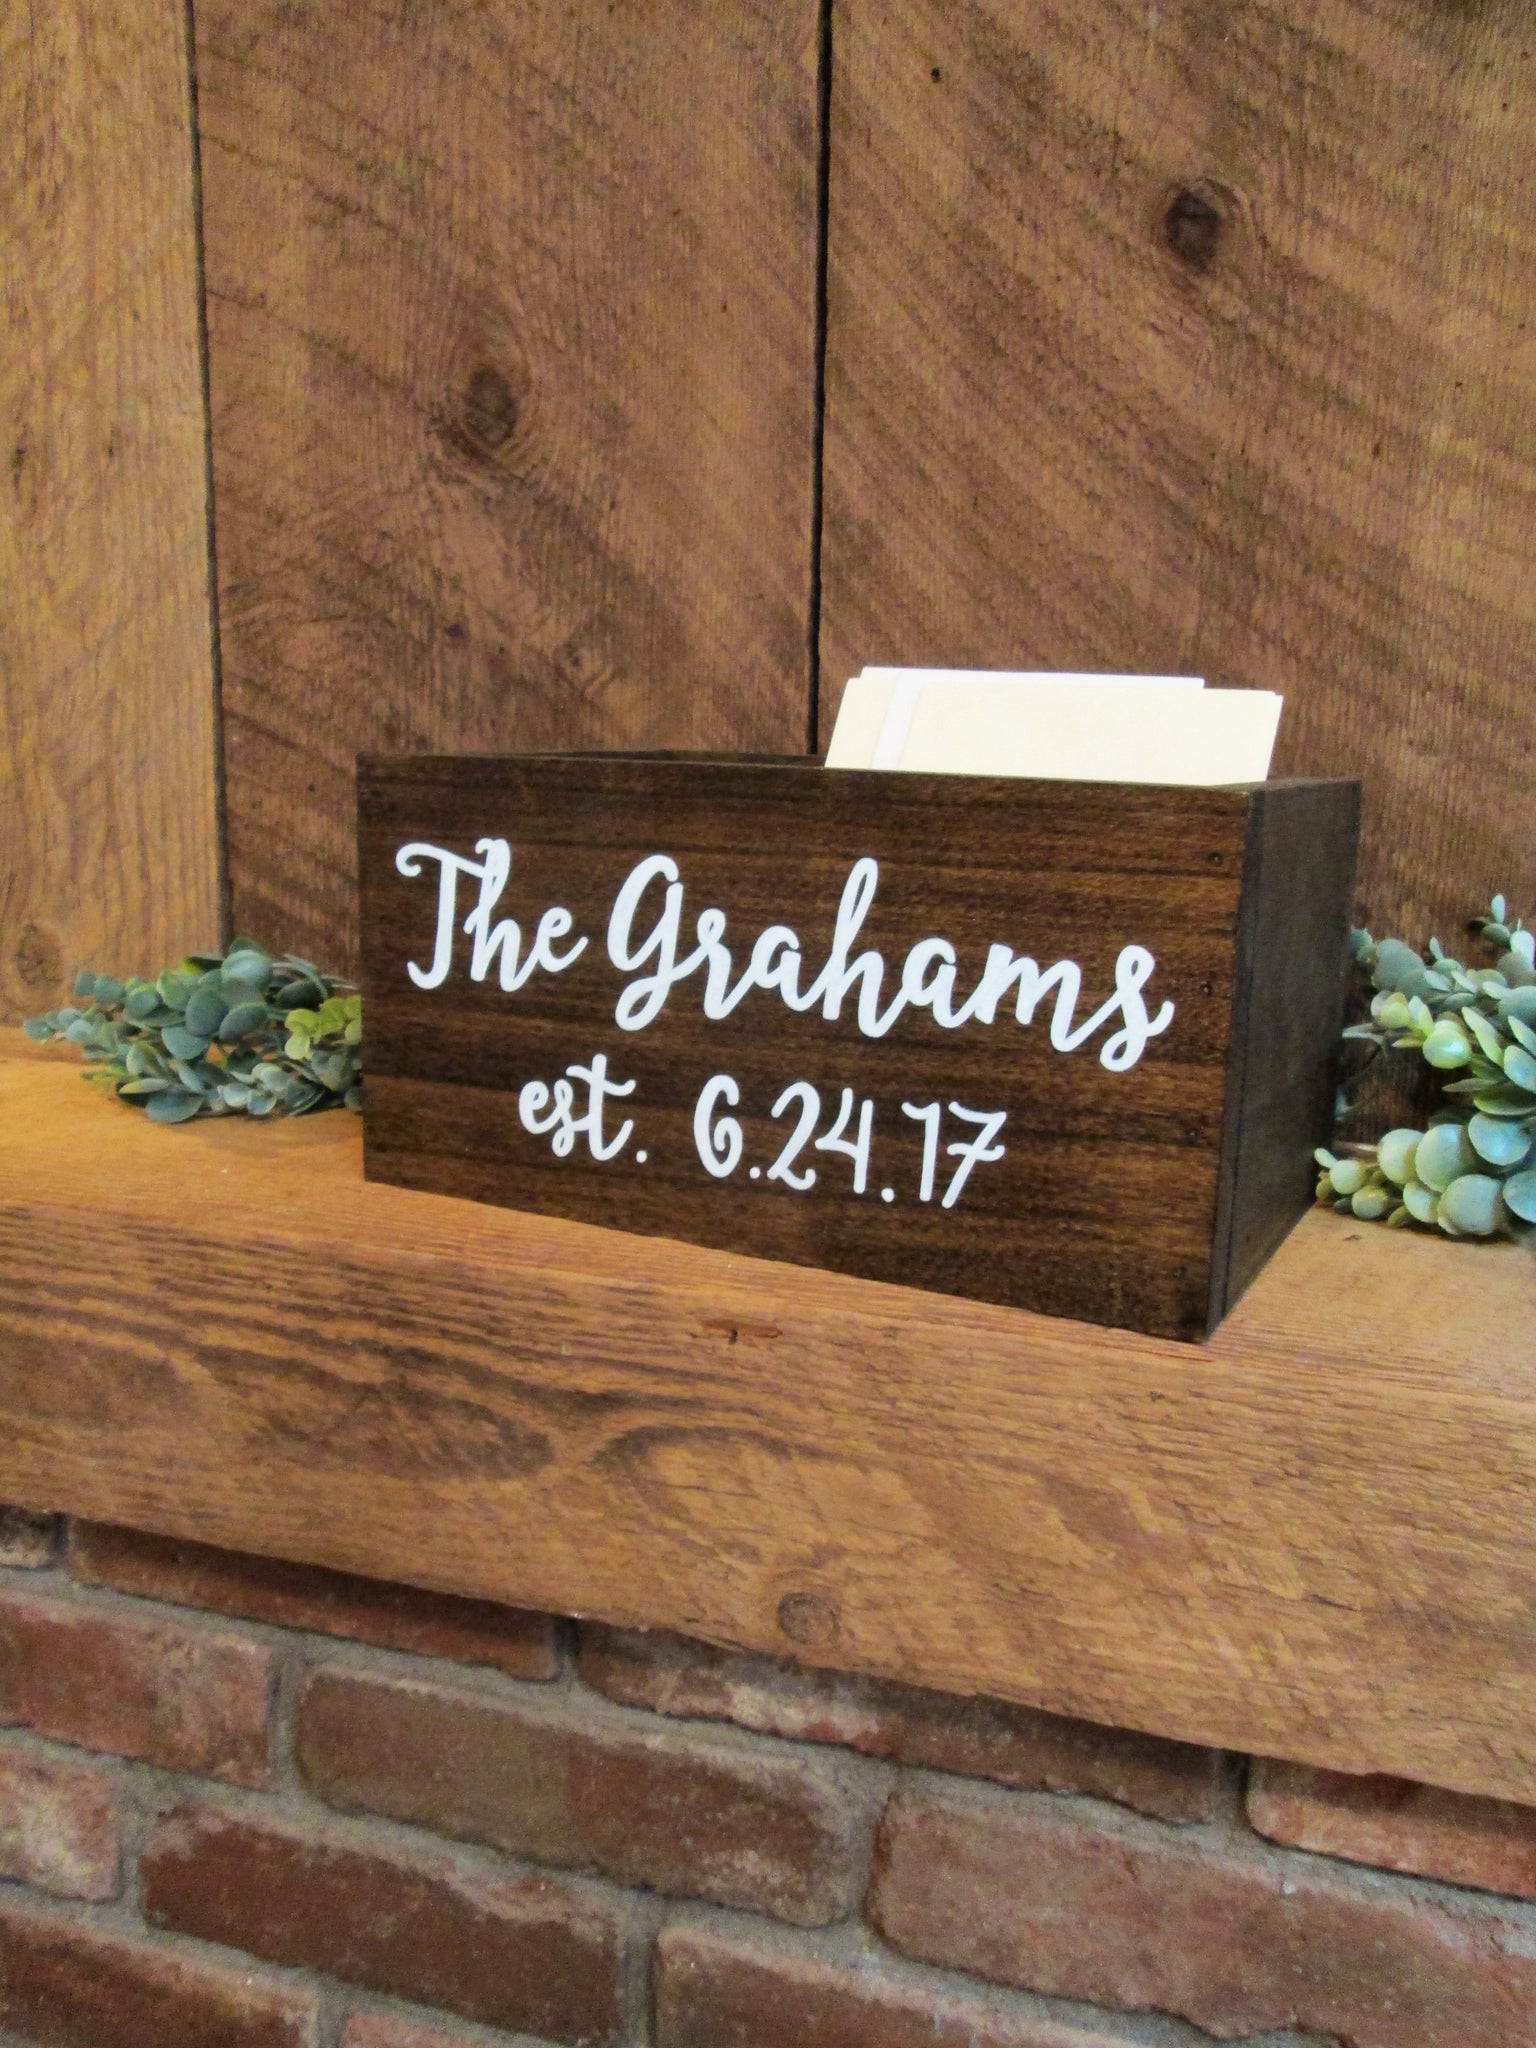 Personalized Wood Card Box - Front Text Only